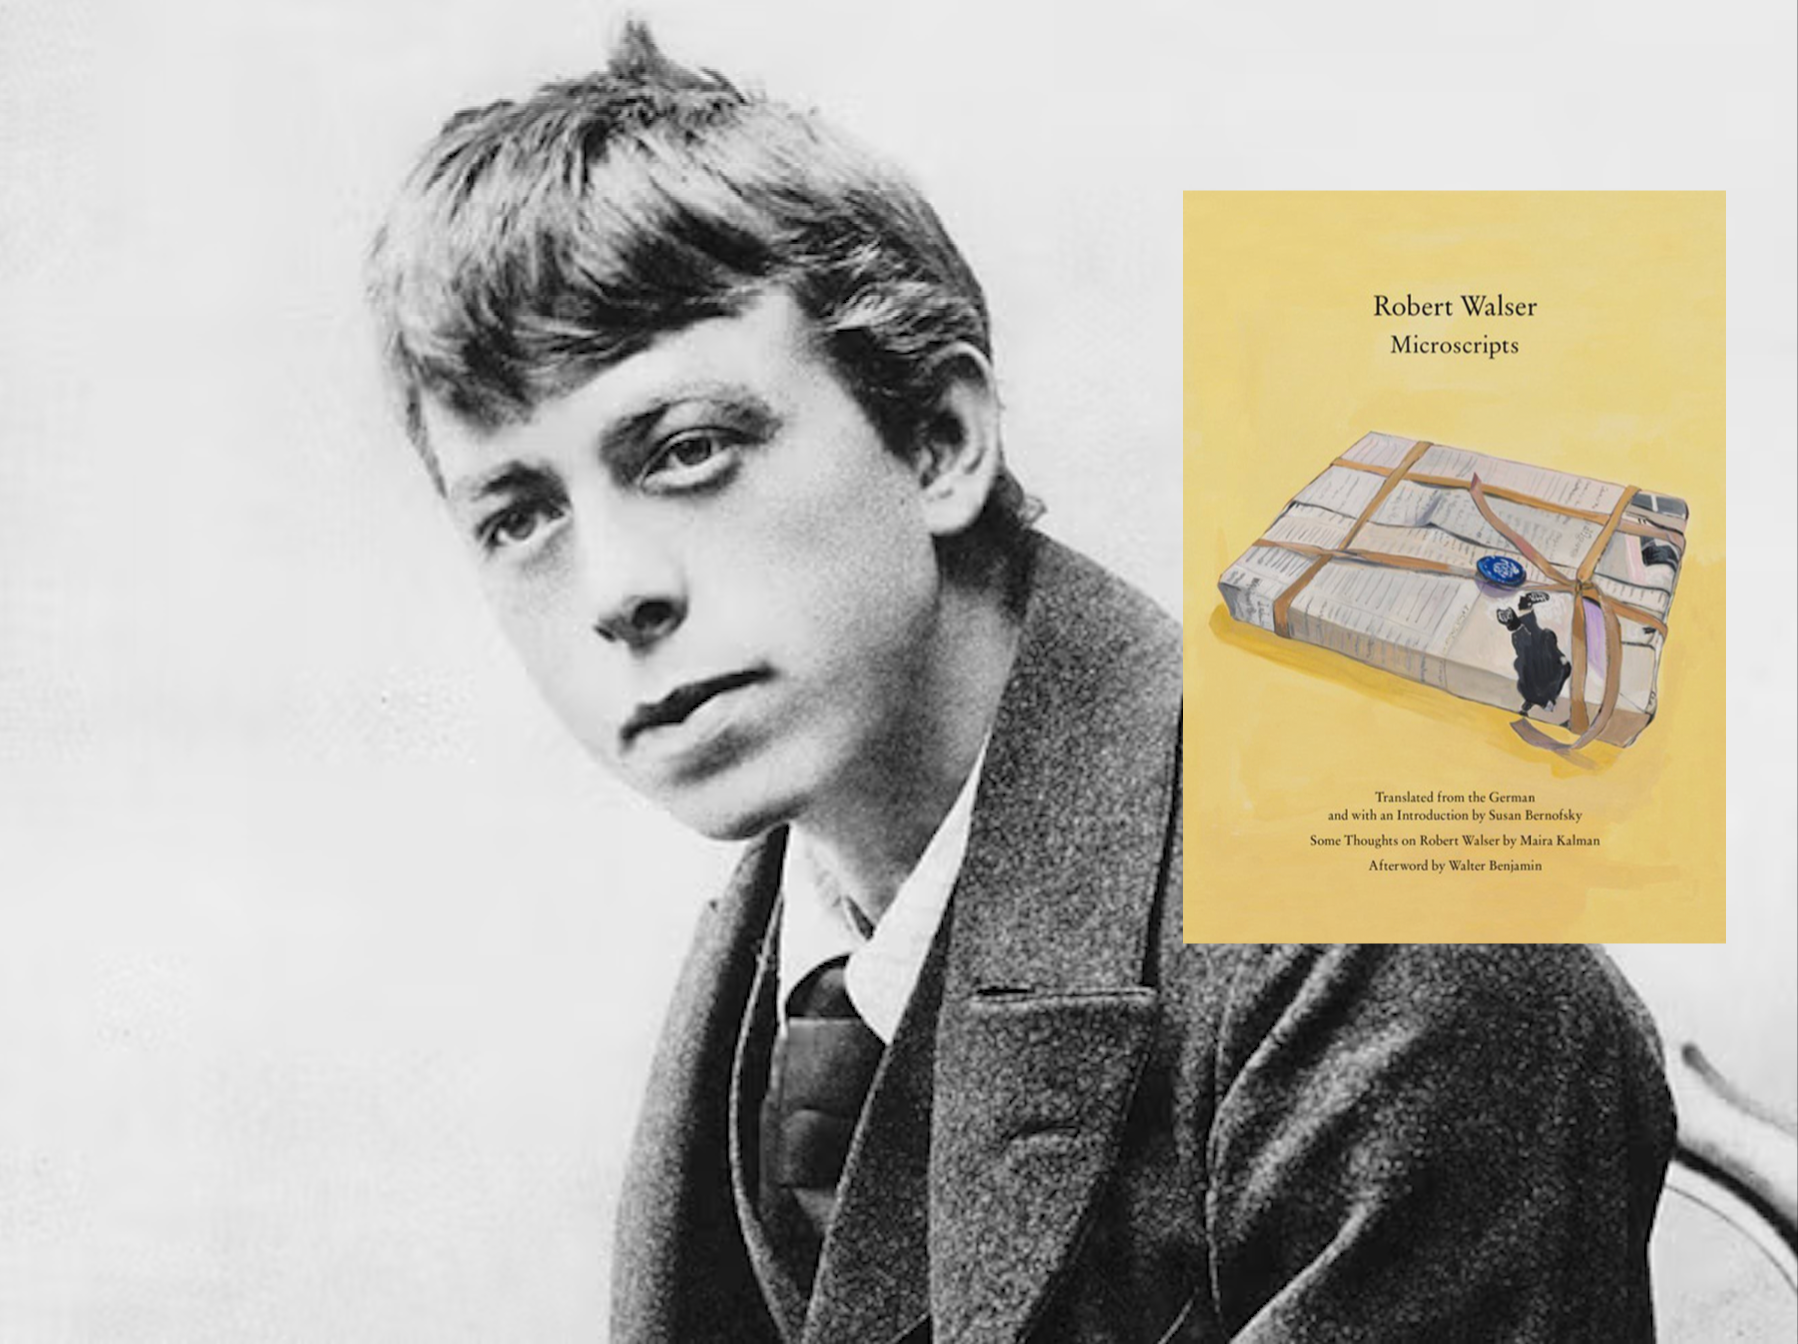 Robert Walser around 1900 and his posthumously published ‘Microscripts’